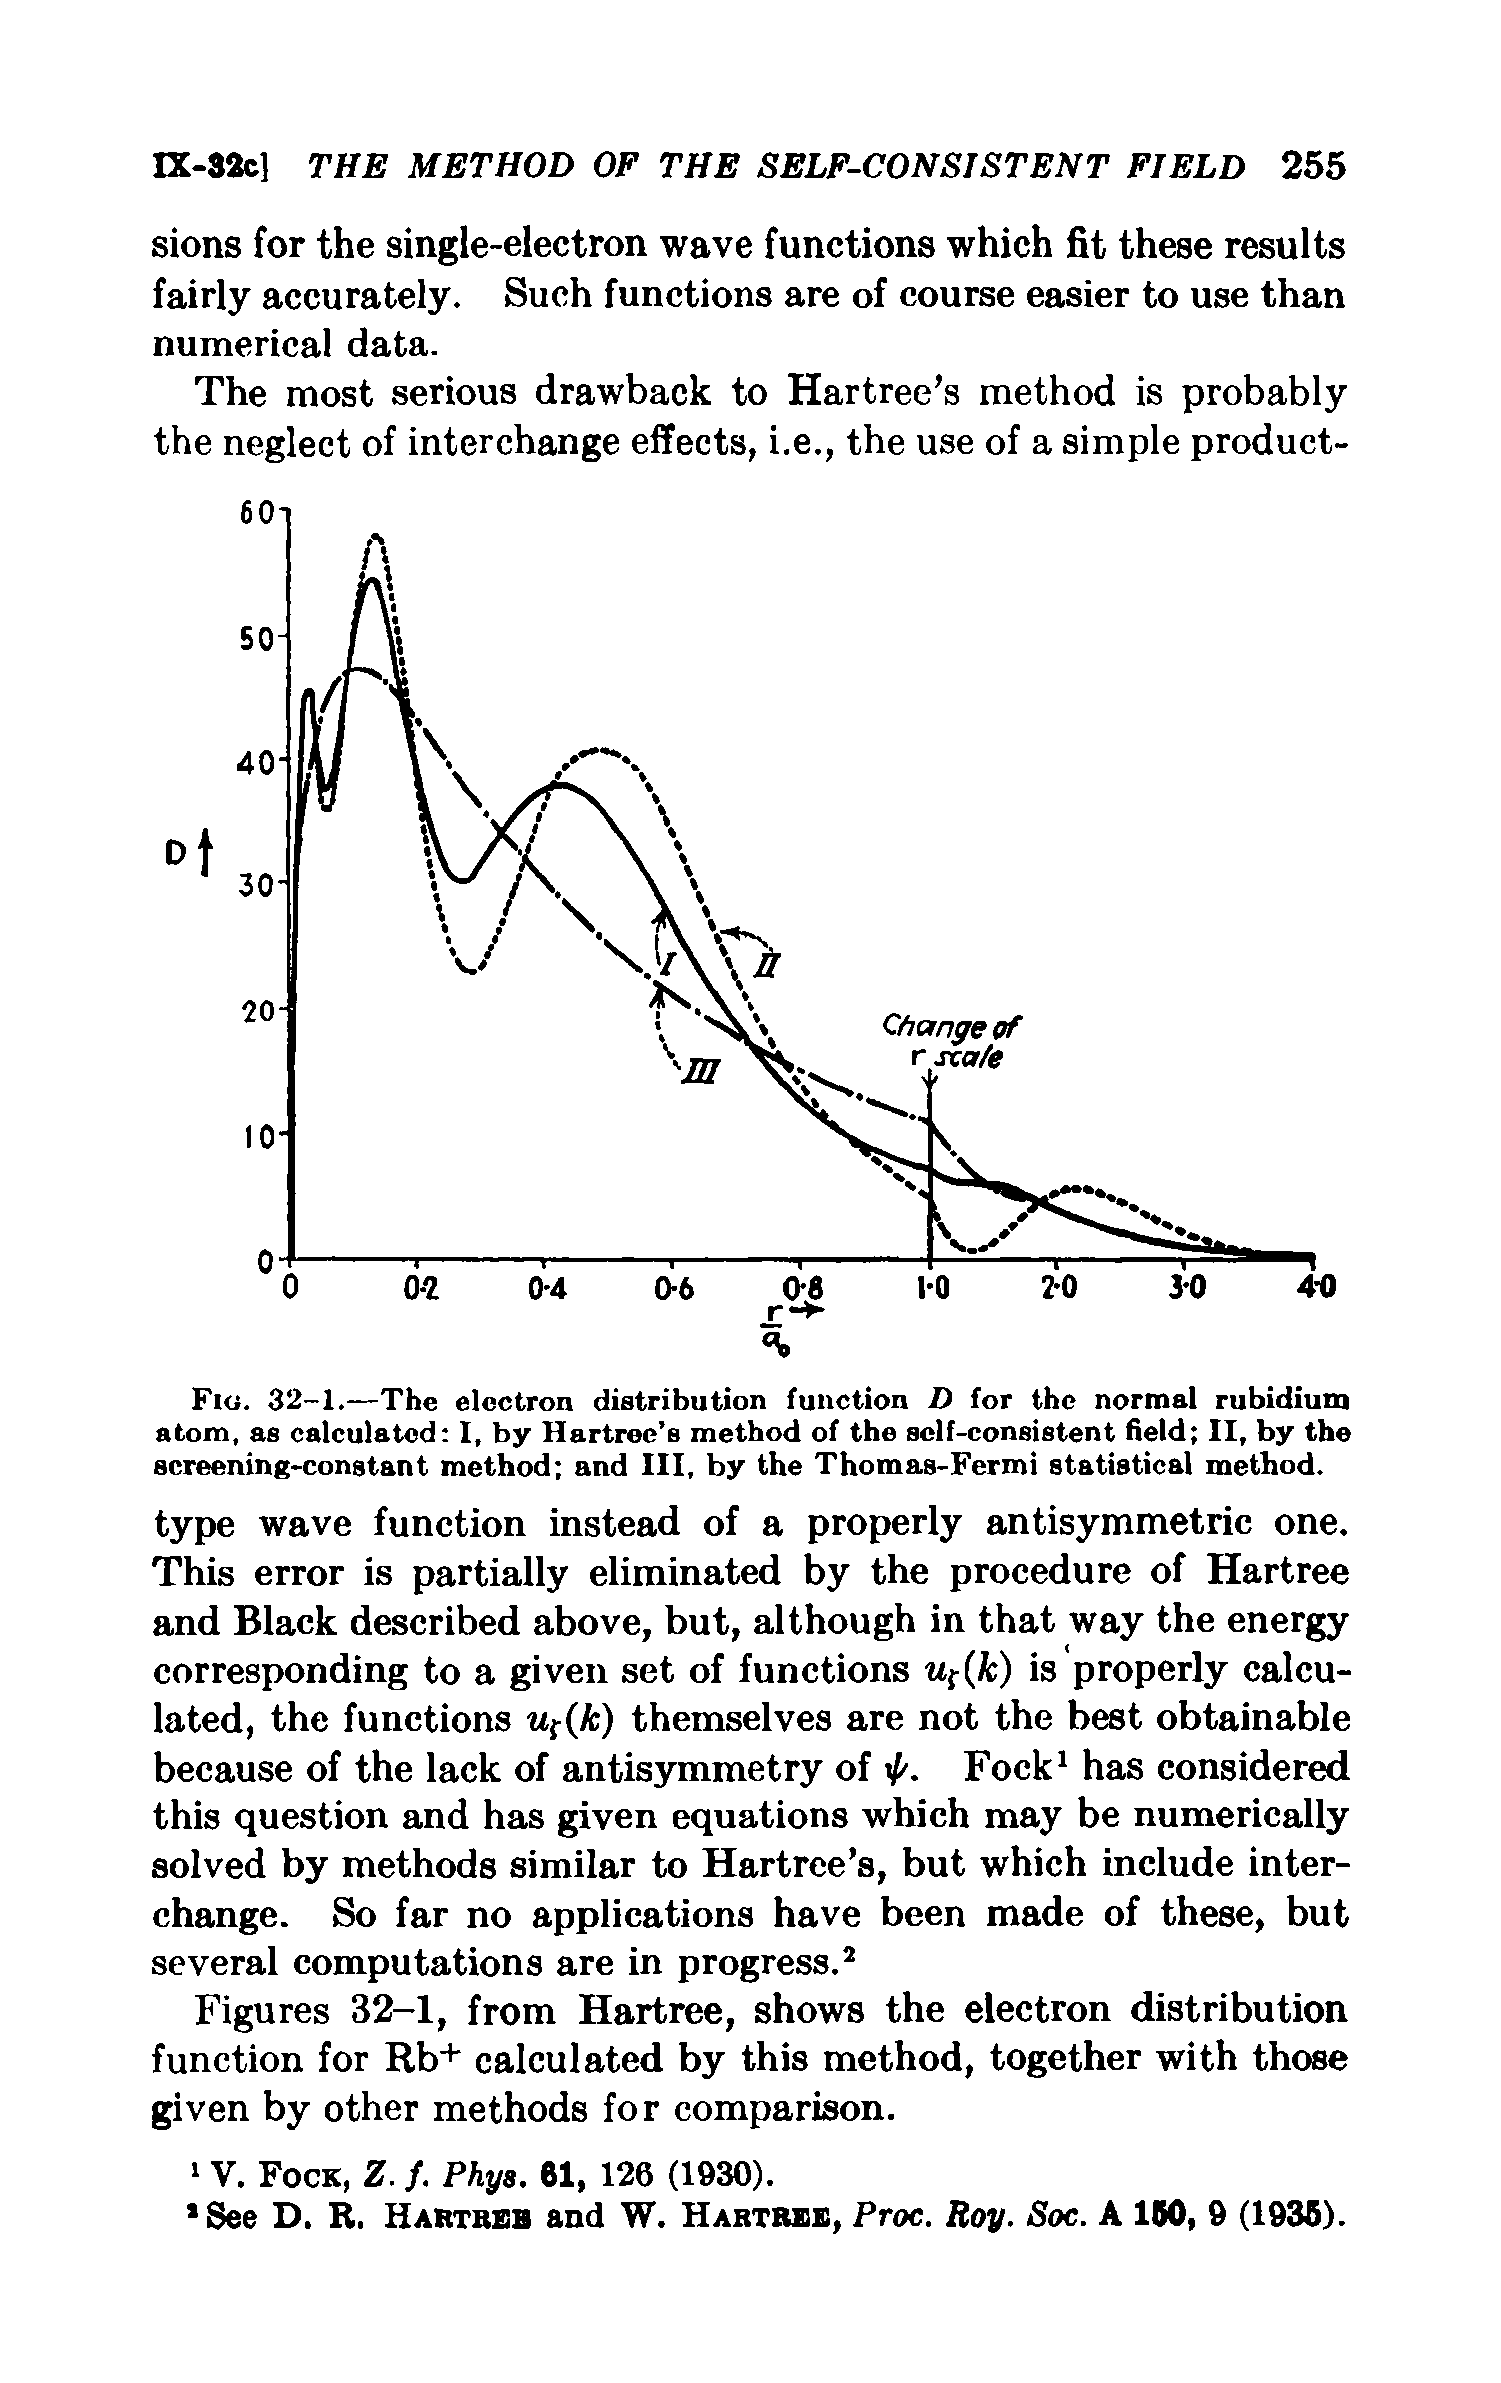 Fig. 32-1.—The electron distribution function D for the normal rubidium atom, as calculated I, by Hartrec s method of the self-consistent field II, by the screening-constant method and 111, by the Thomas-Fermi statistical method.